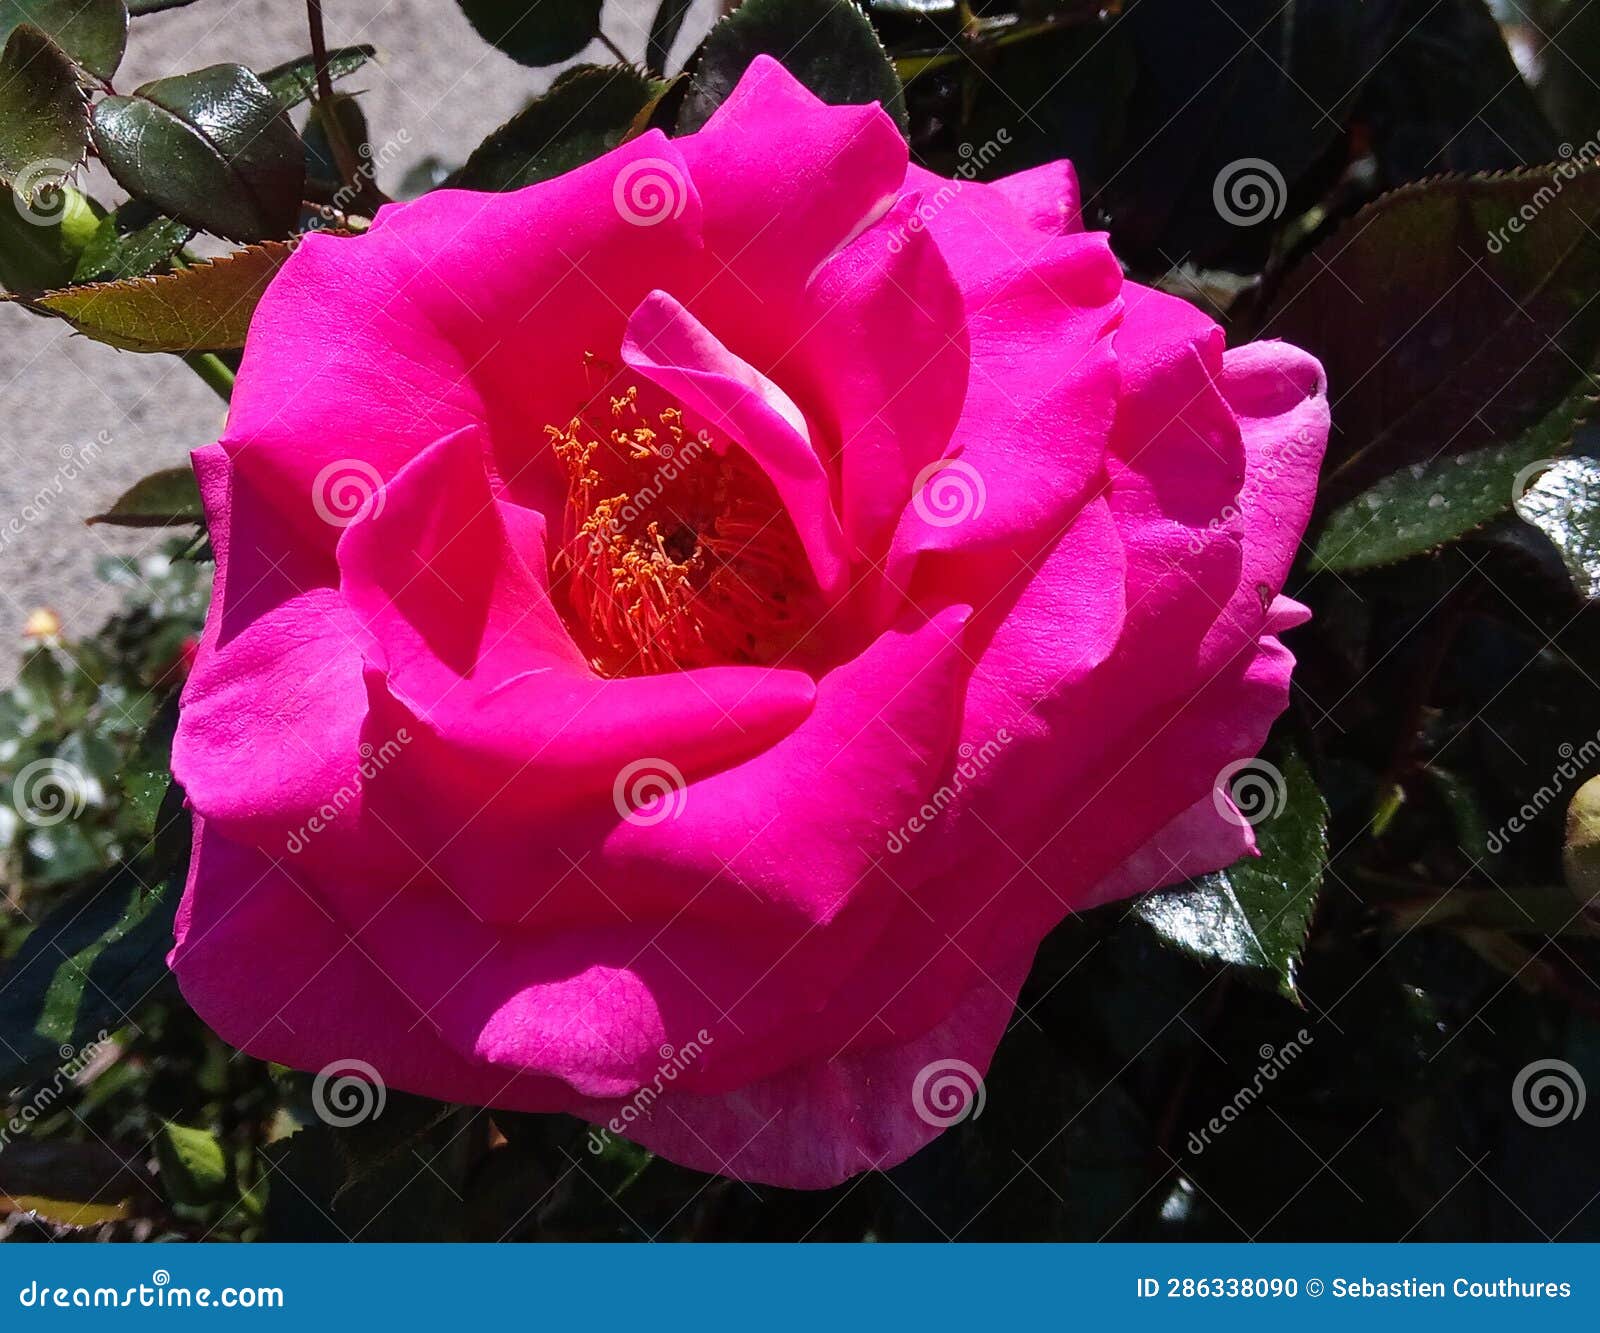 very beautiful rose (rosa) of pink color close-up